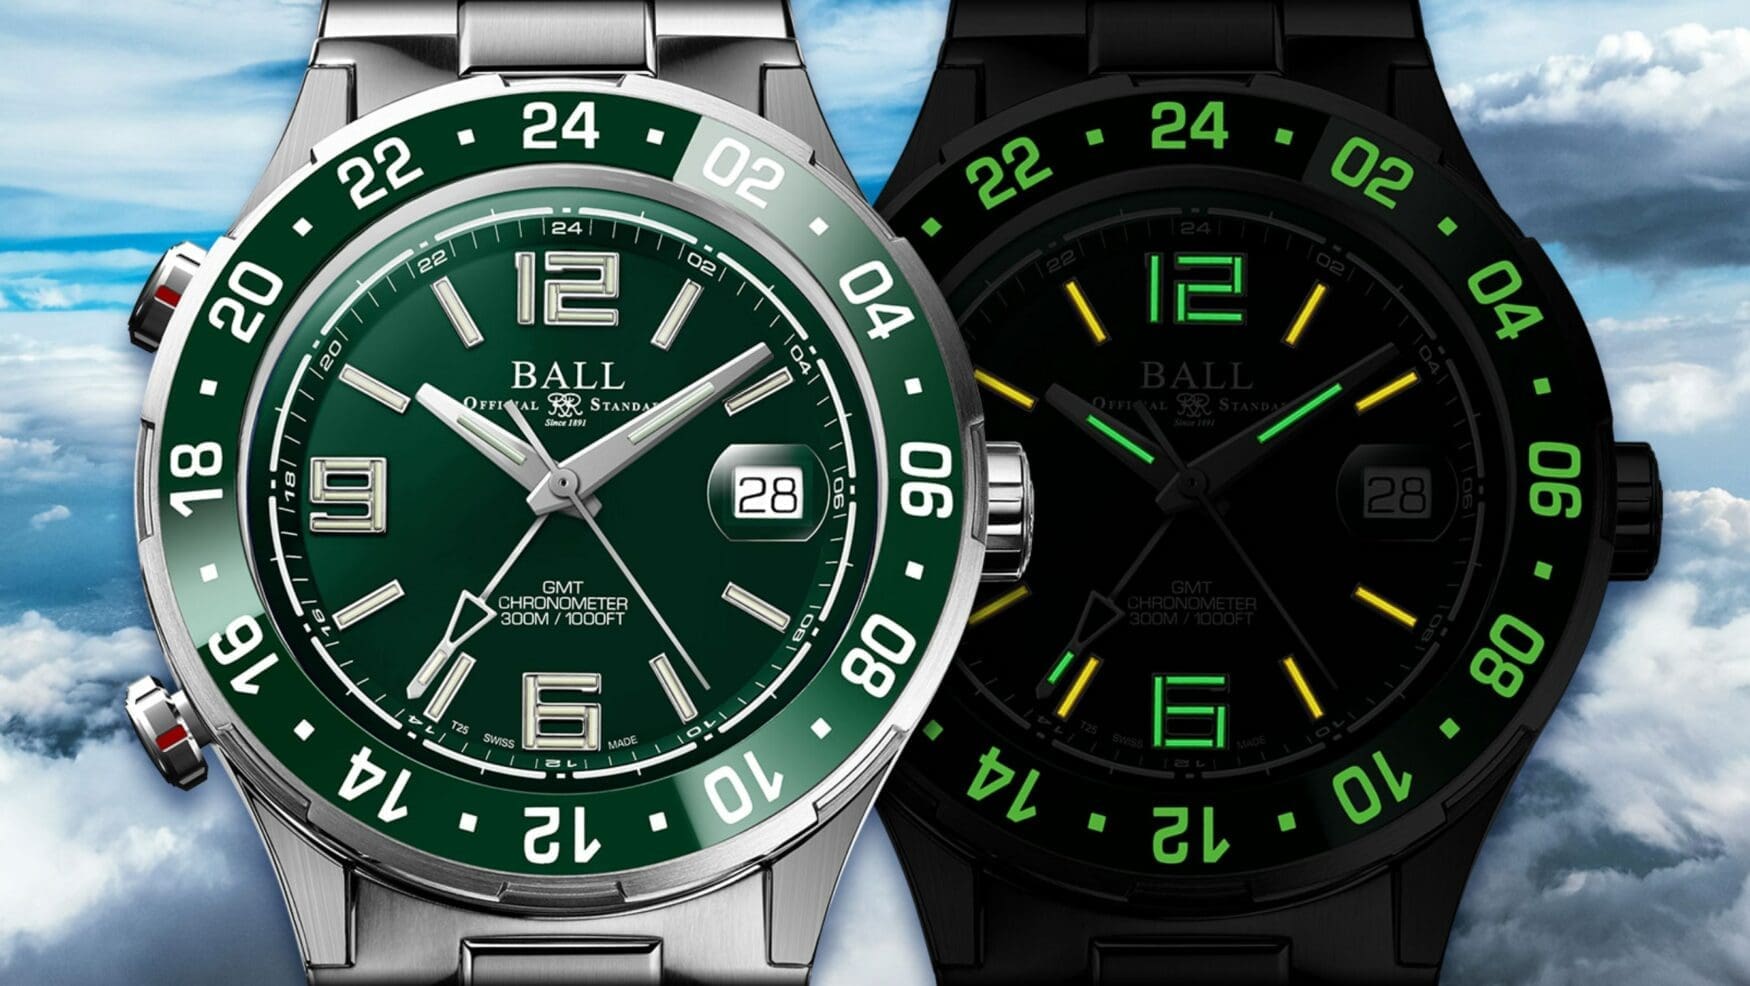 The Ball Engineer Roadmaster Pilot GMT Green offers a unique take on a true GMT